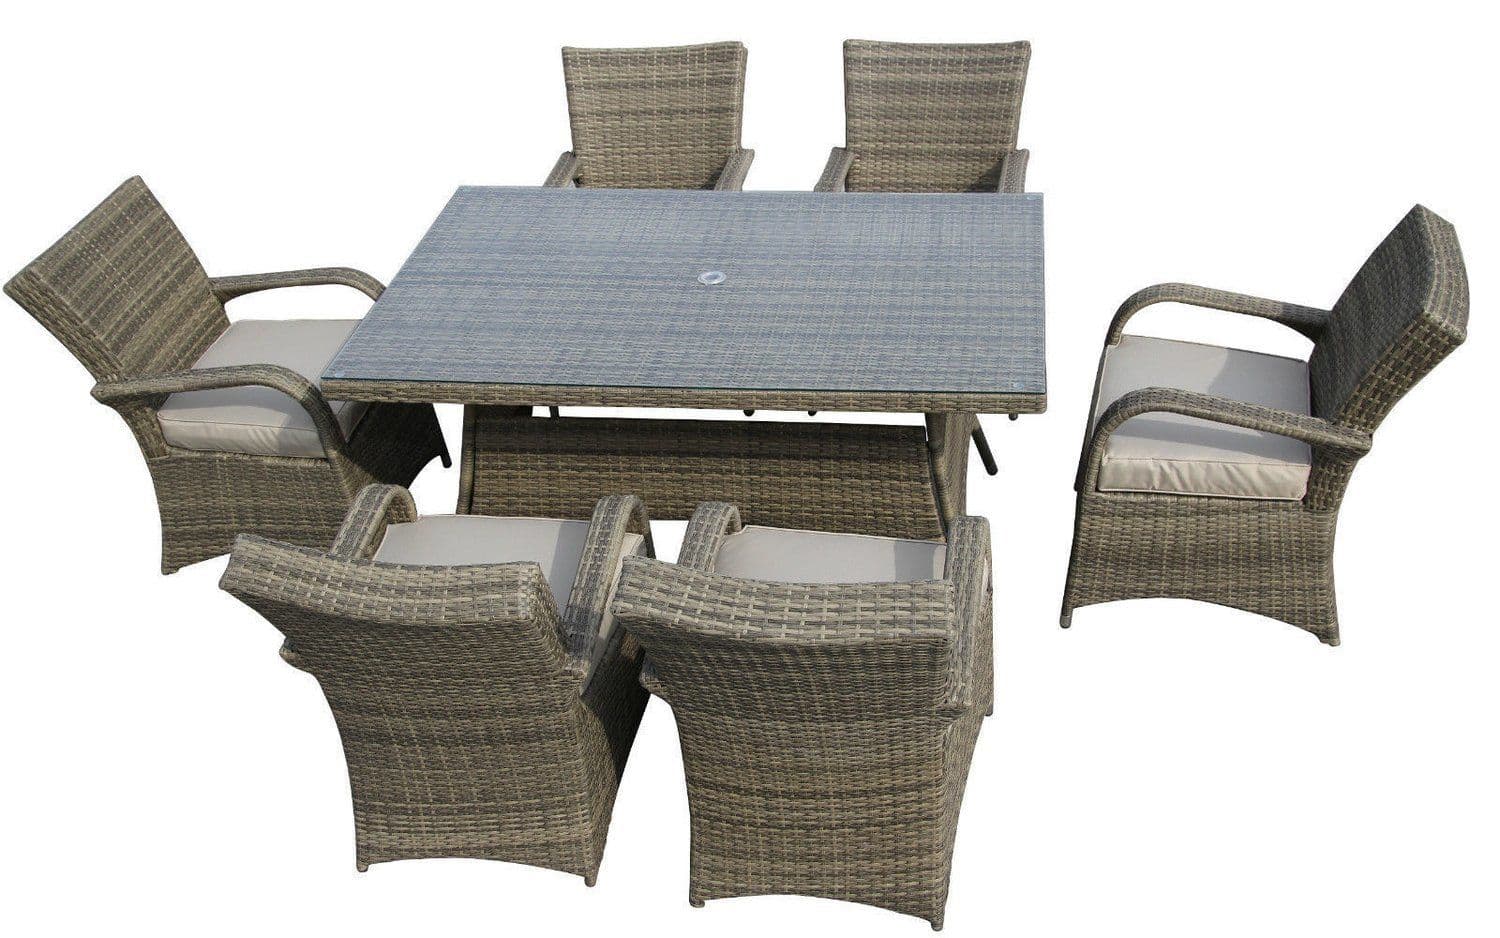 The Somet 6 Seater with Rectangle Table